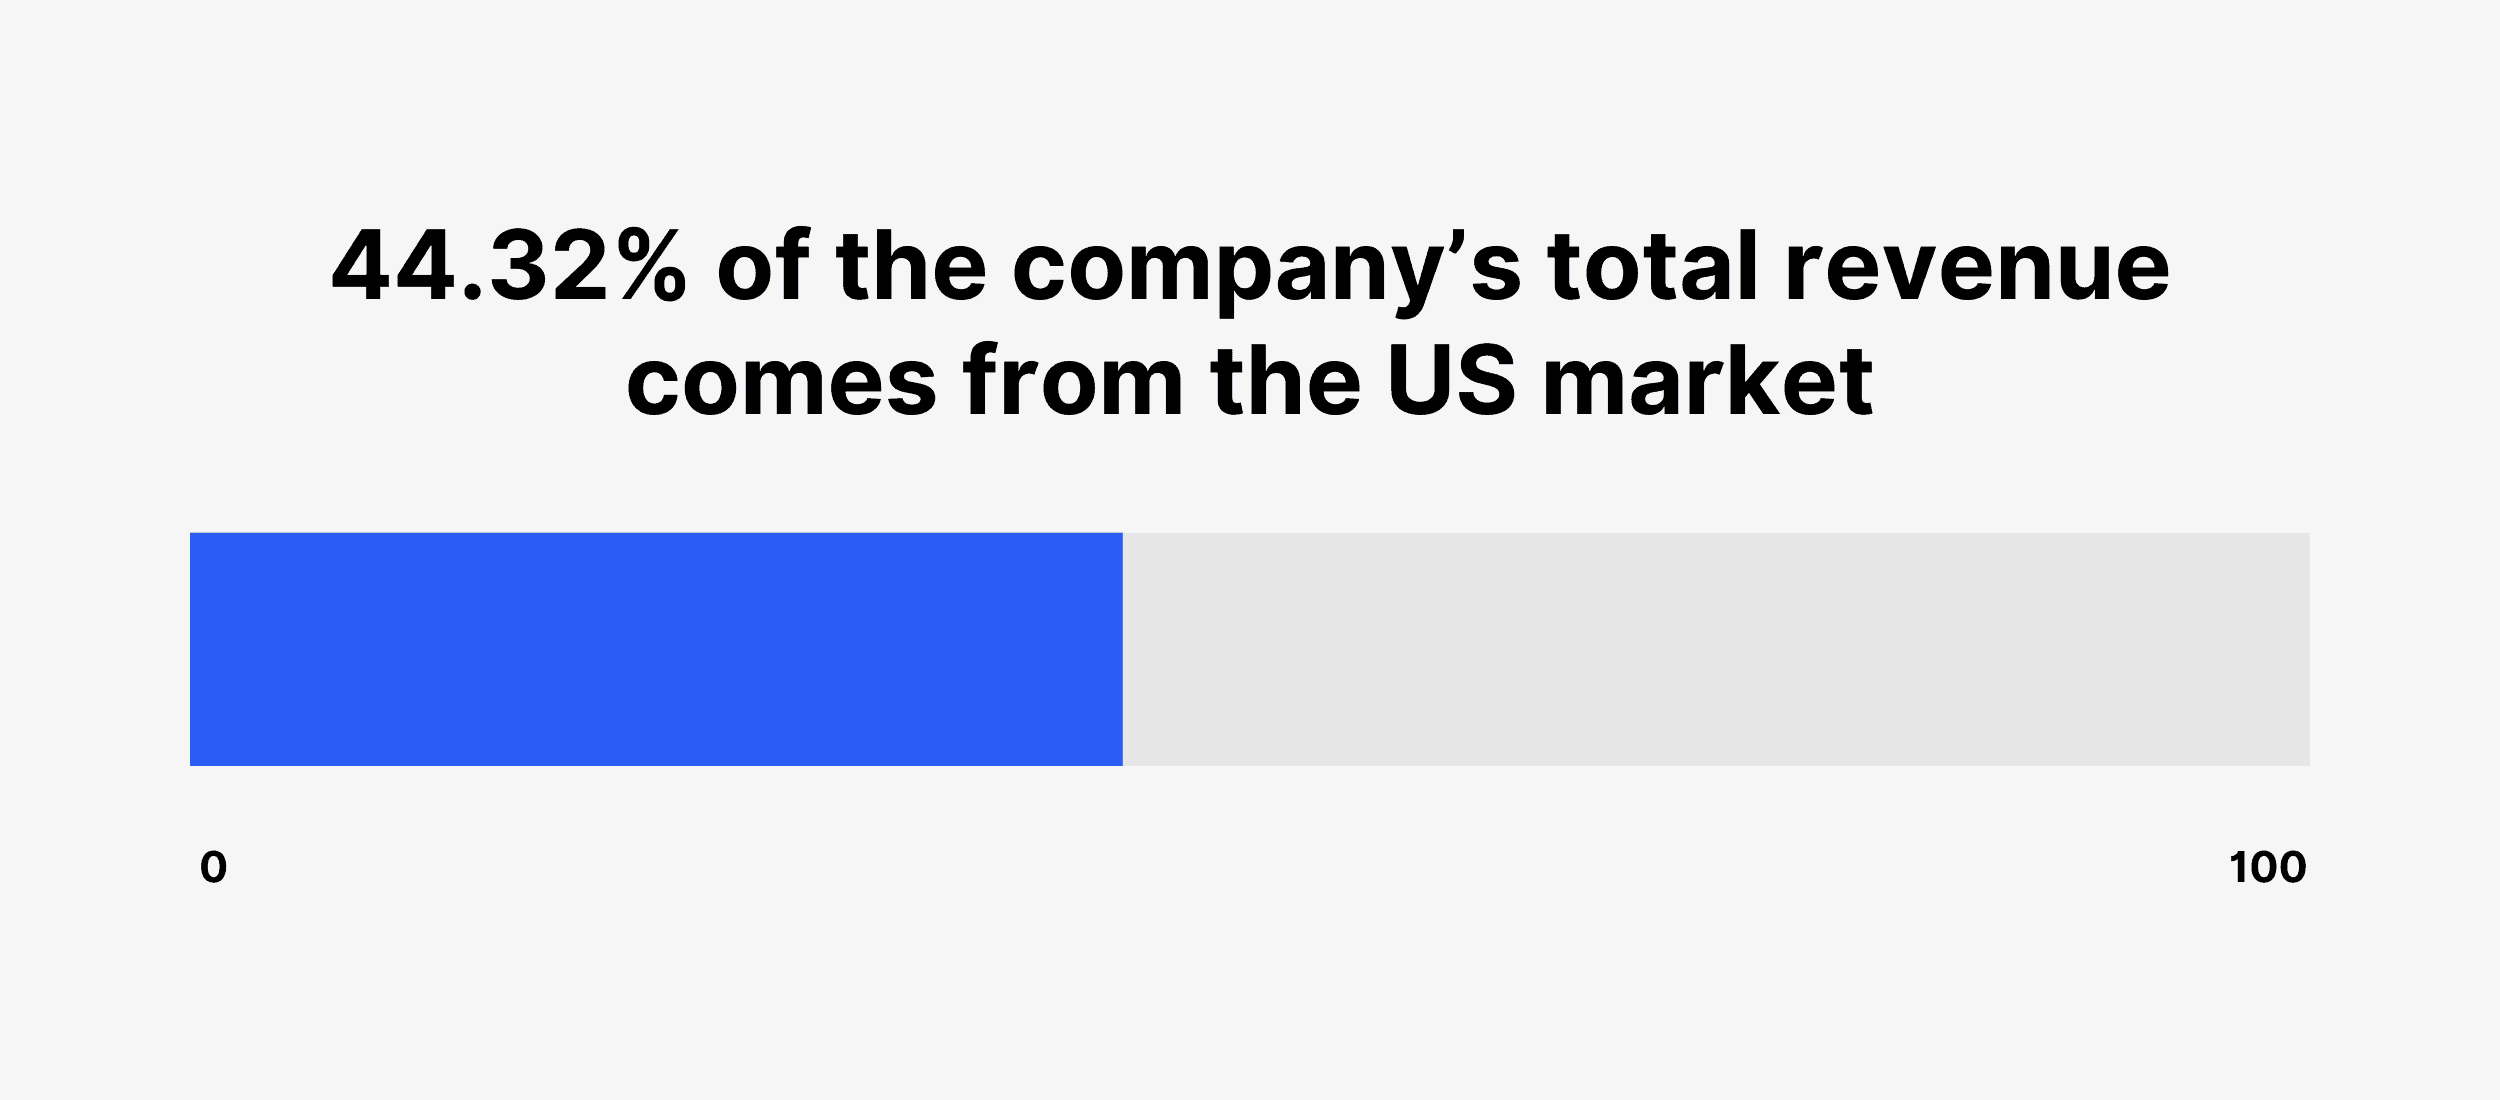 44.32% of the company’s total revenue comes from the US market